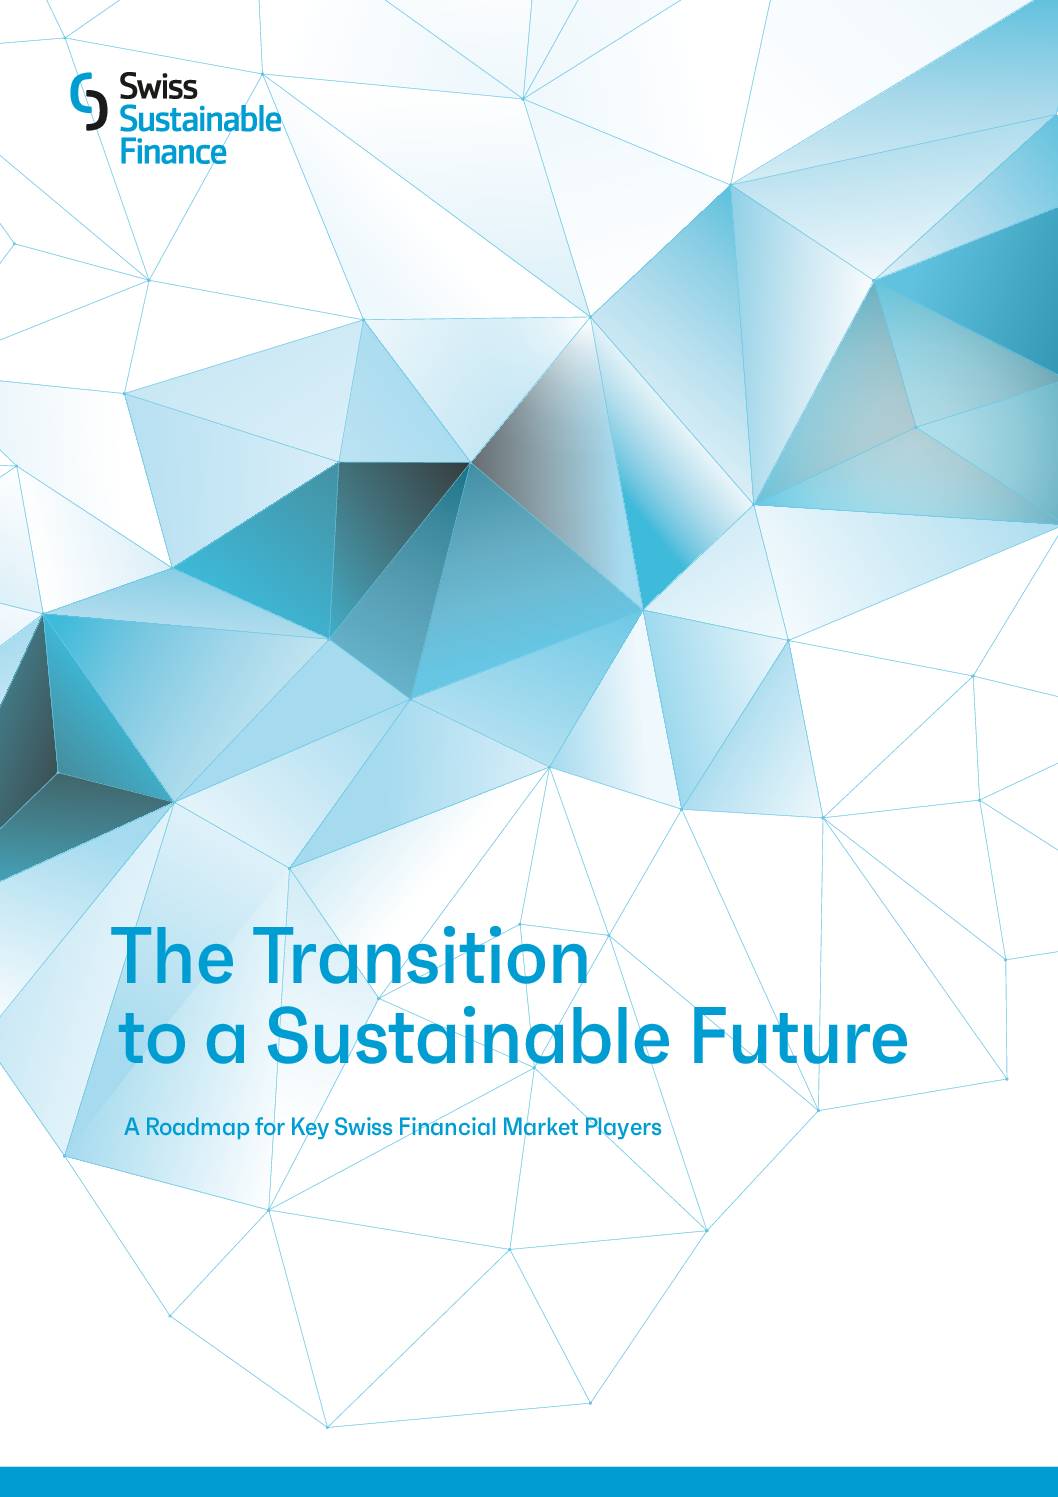 The Roadmap to a Sustainable Future